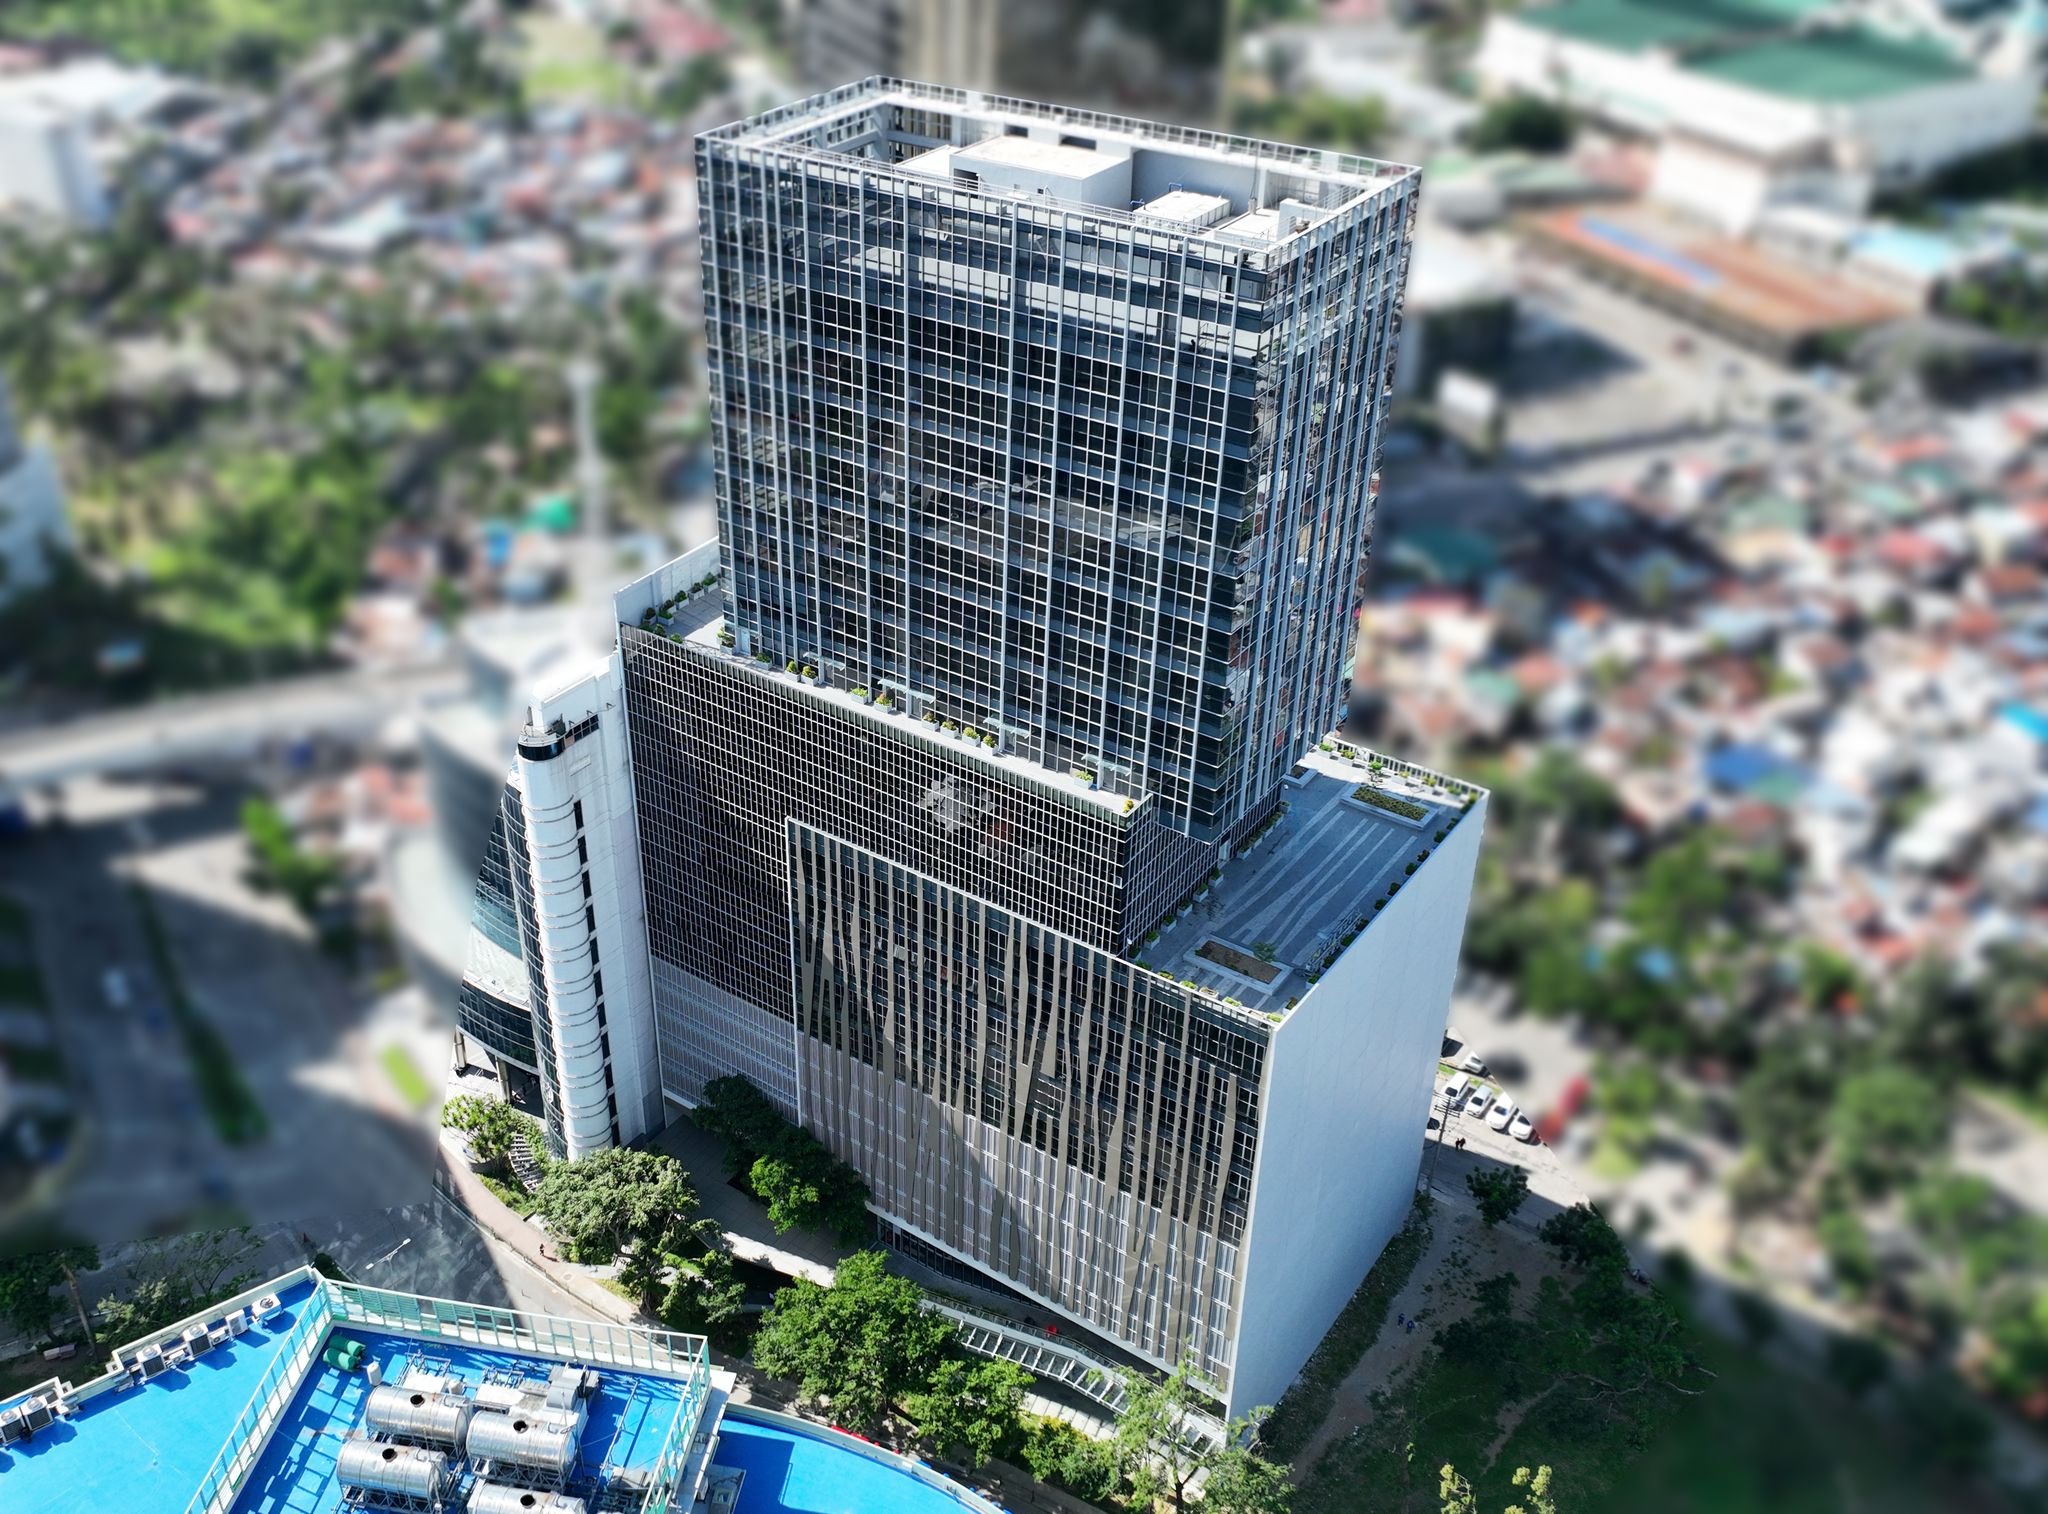 CLI’s newly completed projects such as Latitude Corporate Center in Cebu Business Park contribute to the company’s positive operating net cash flow of P1.8 billion in Q1 2022.